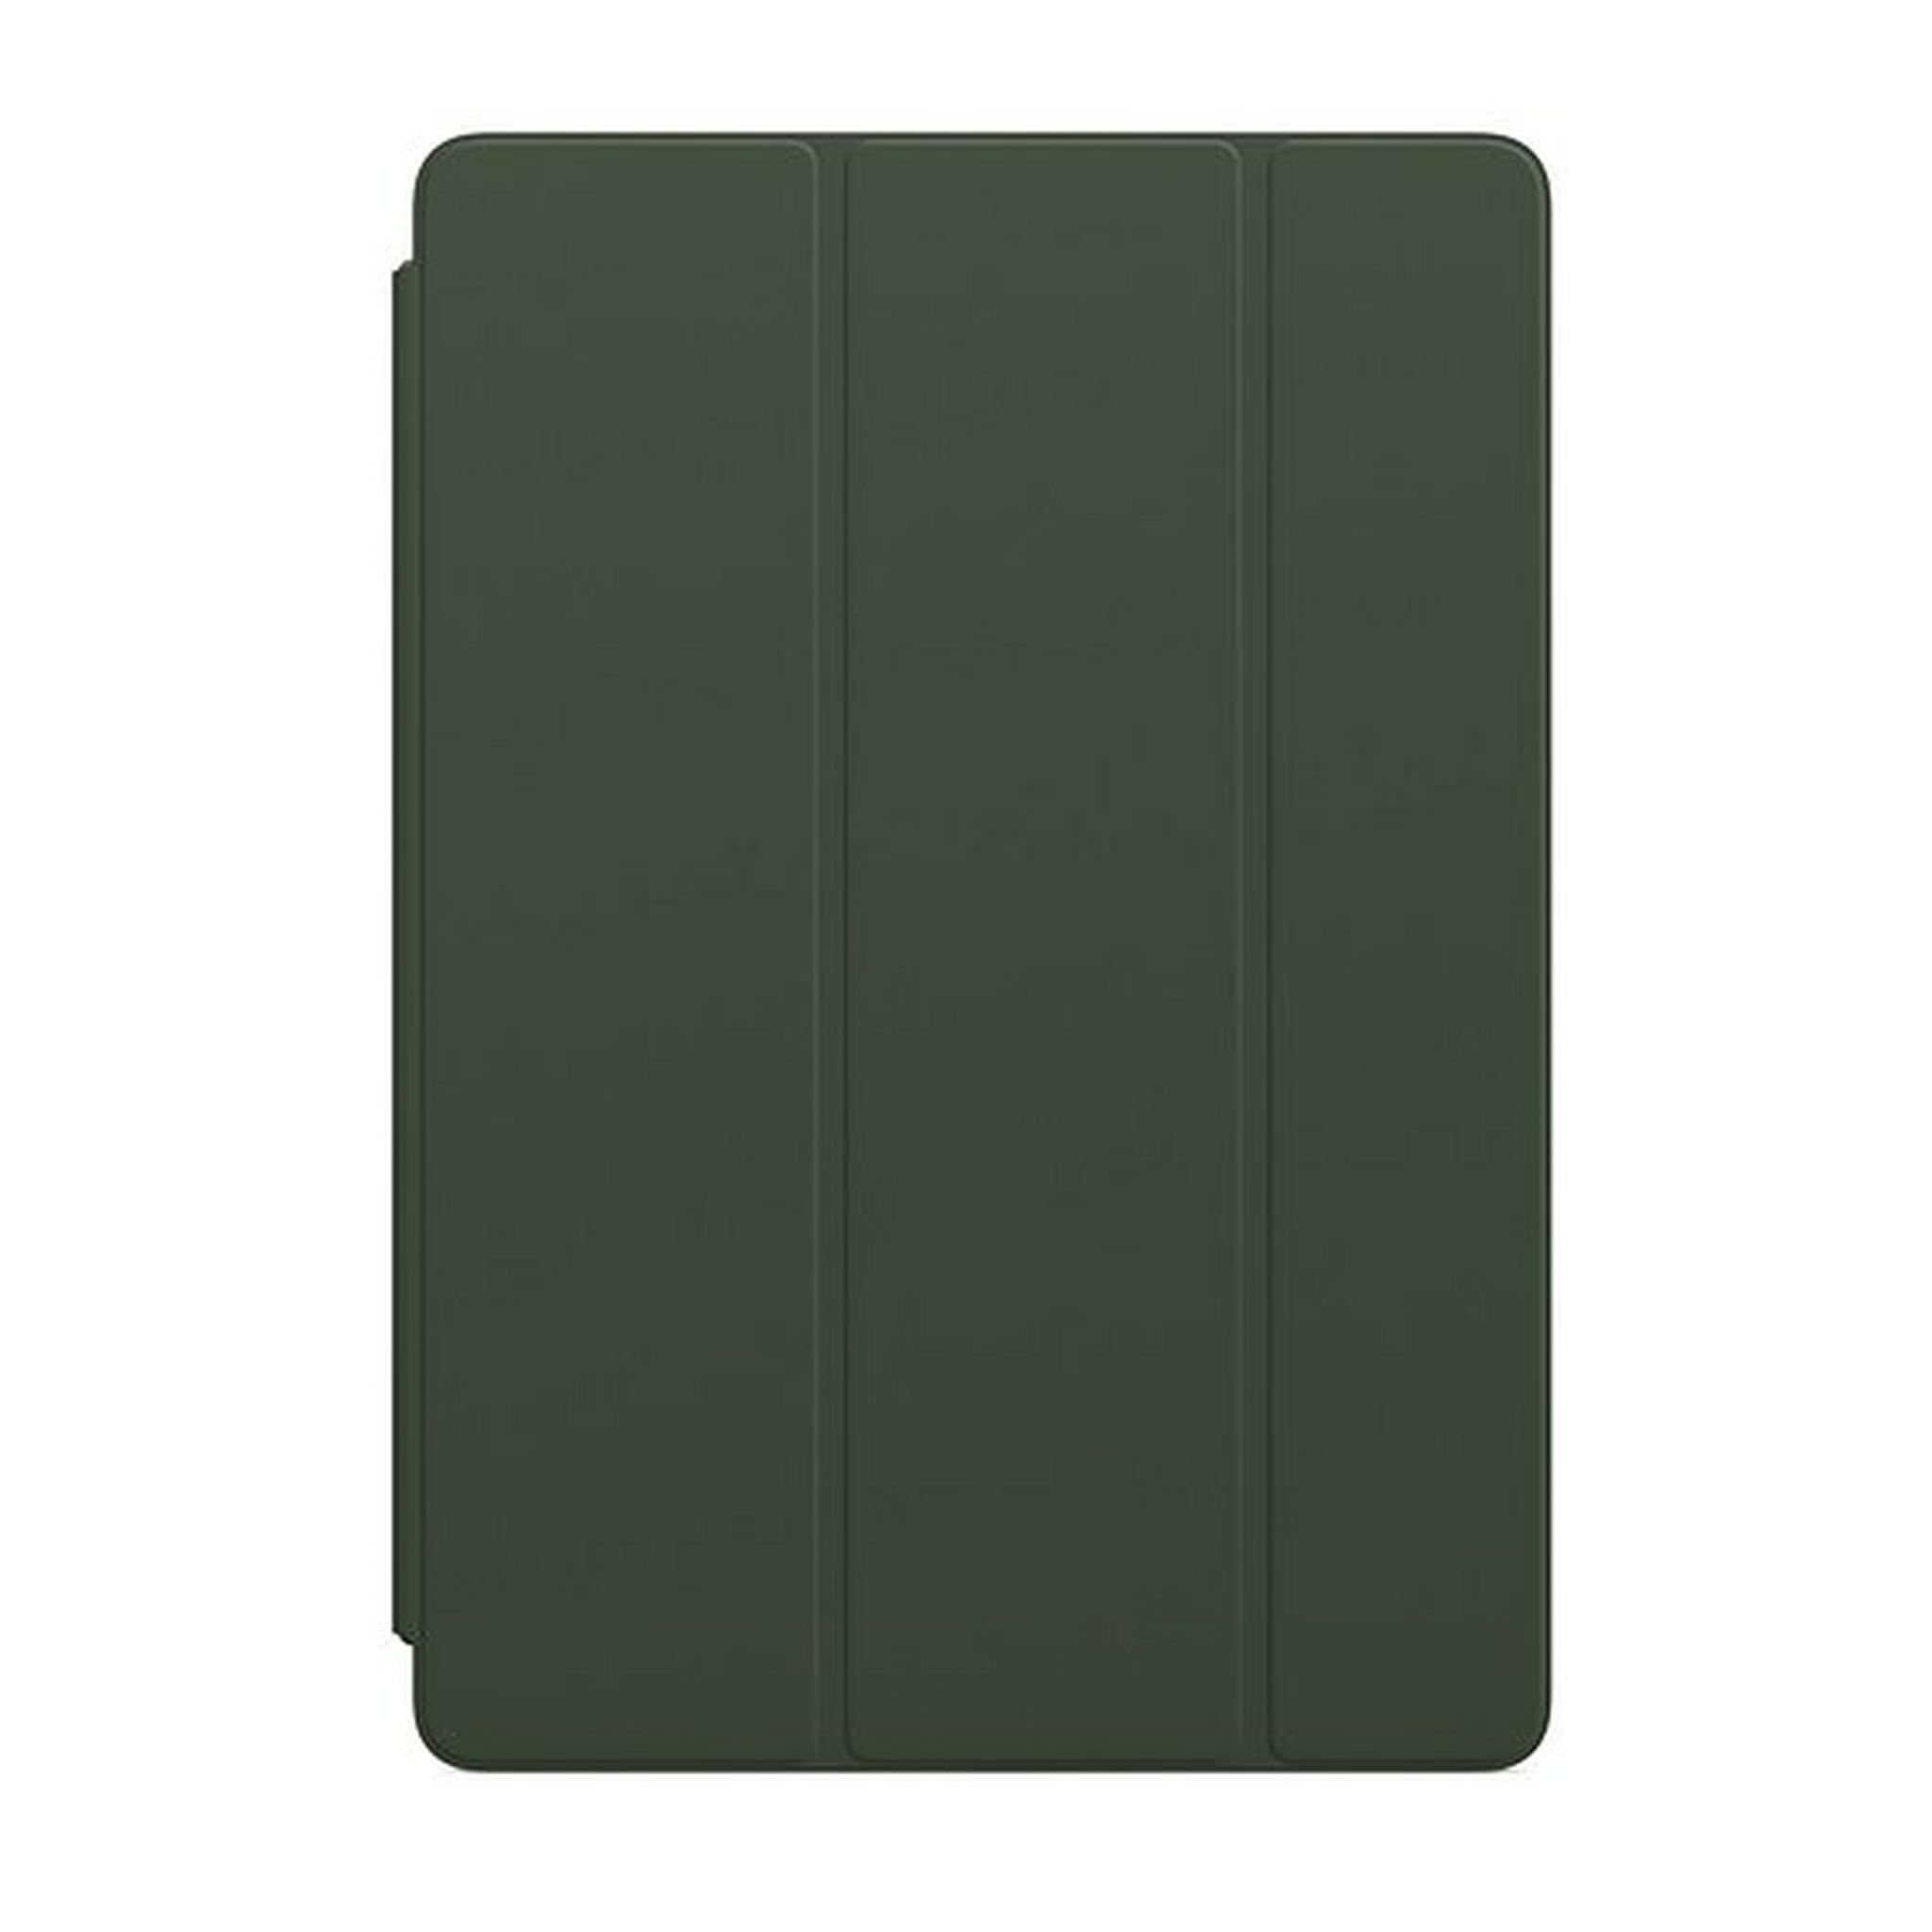 Apple Smart Cover for iPad - 8th Generation - Green